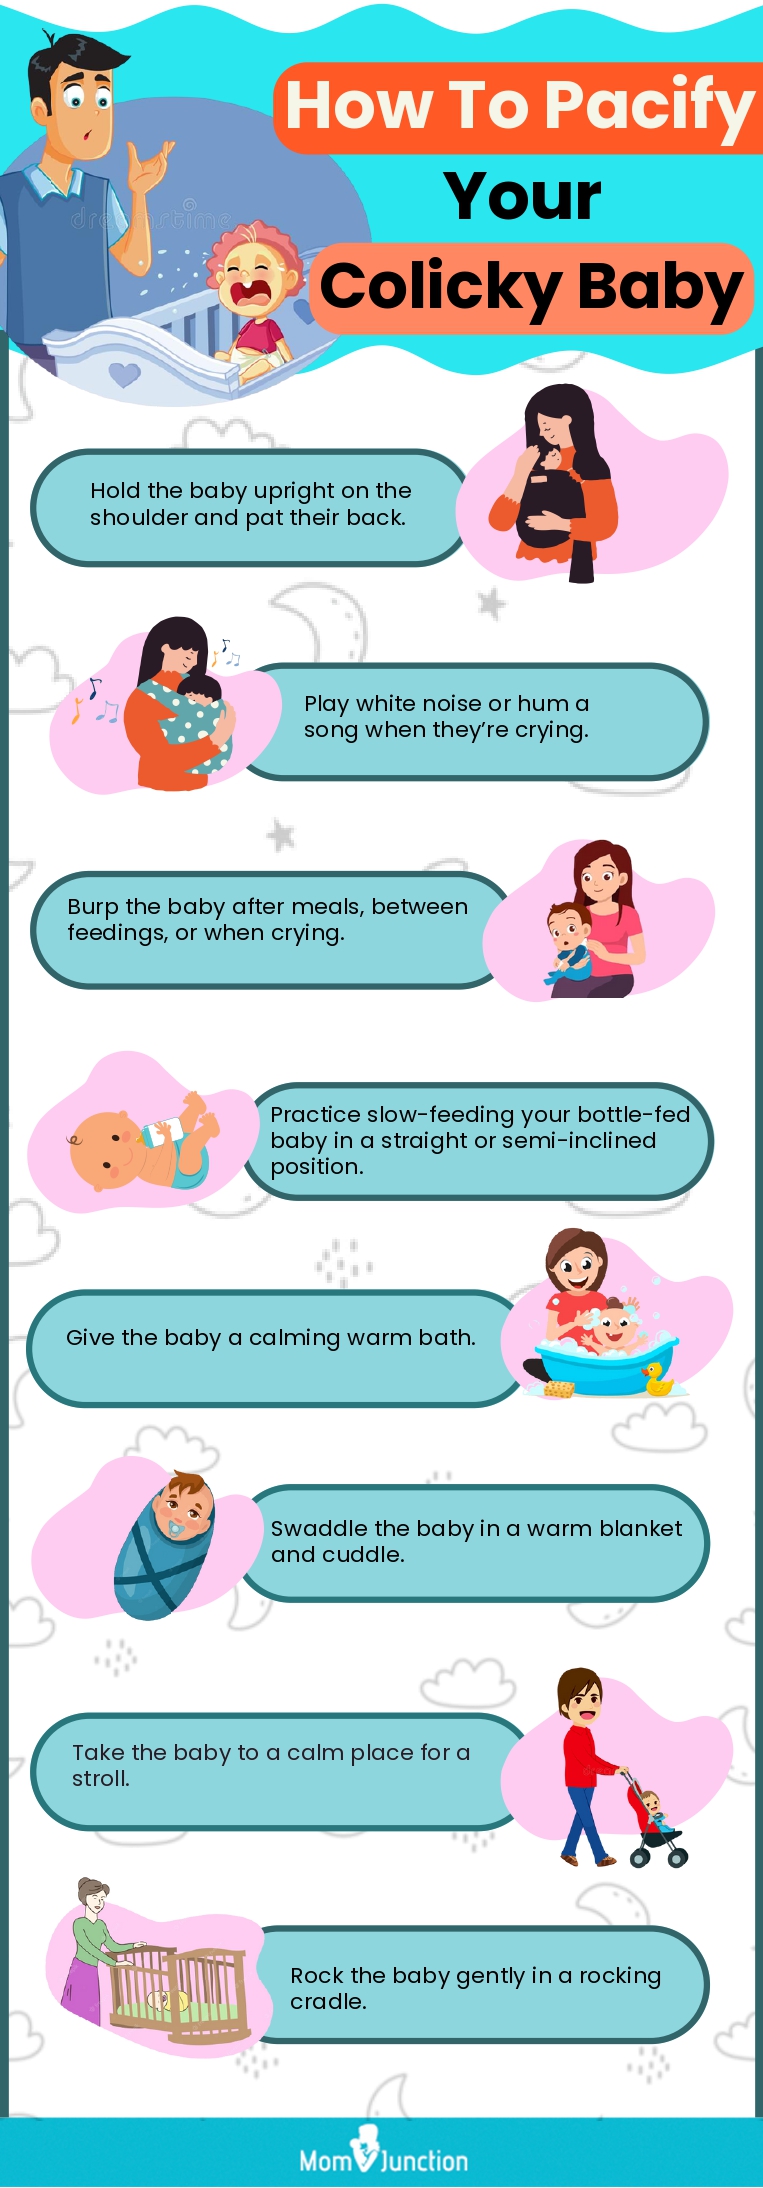 how to pacify your colicky baby(infographic)